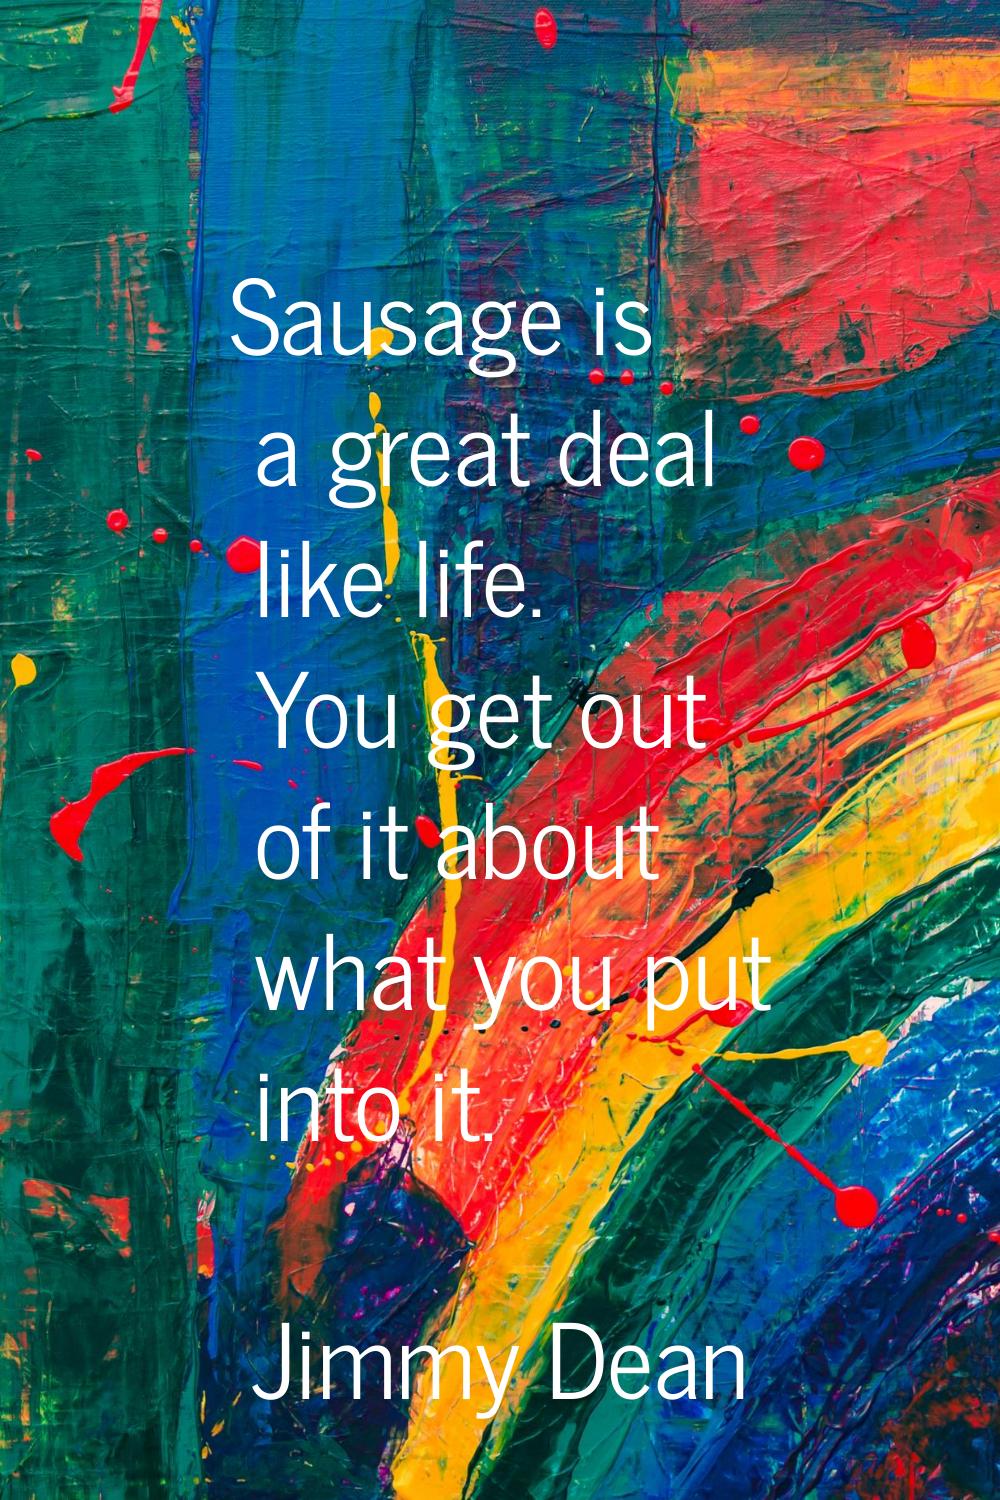 Sausage is a great deal like life. You get out of it about what you put into it.